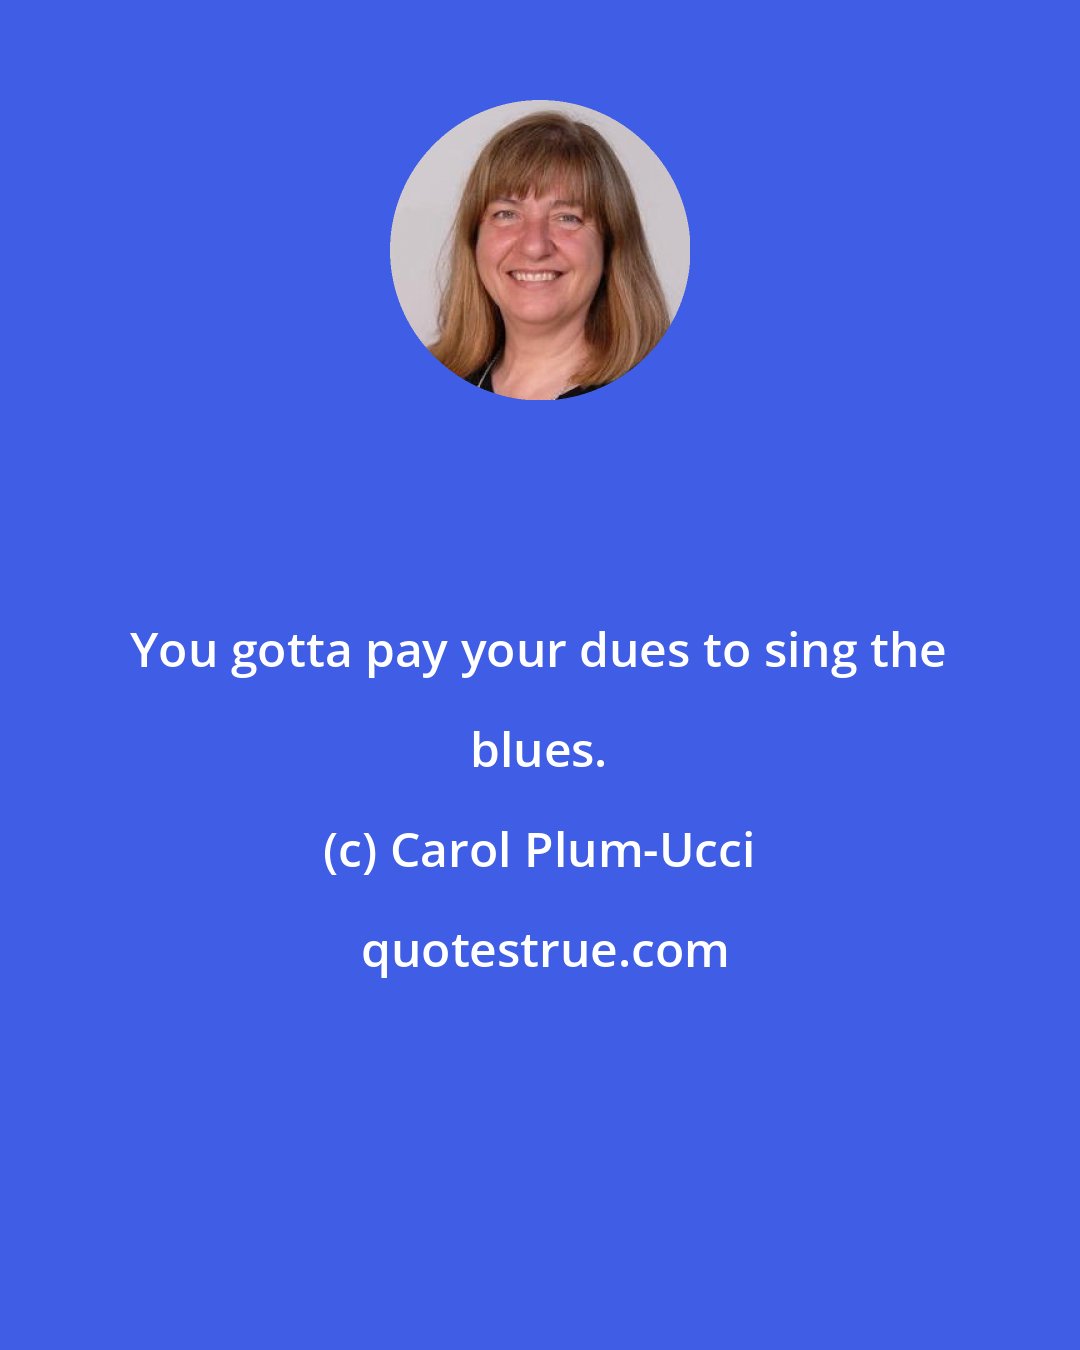 Carol Plum-Ucci: You gotta pay your dues to sing the blues.